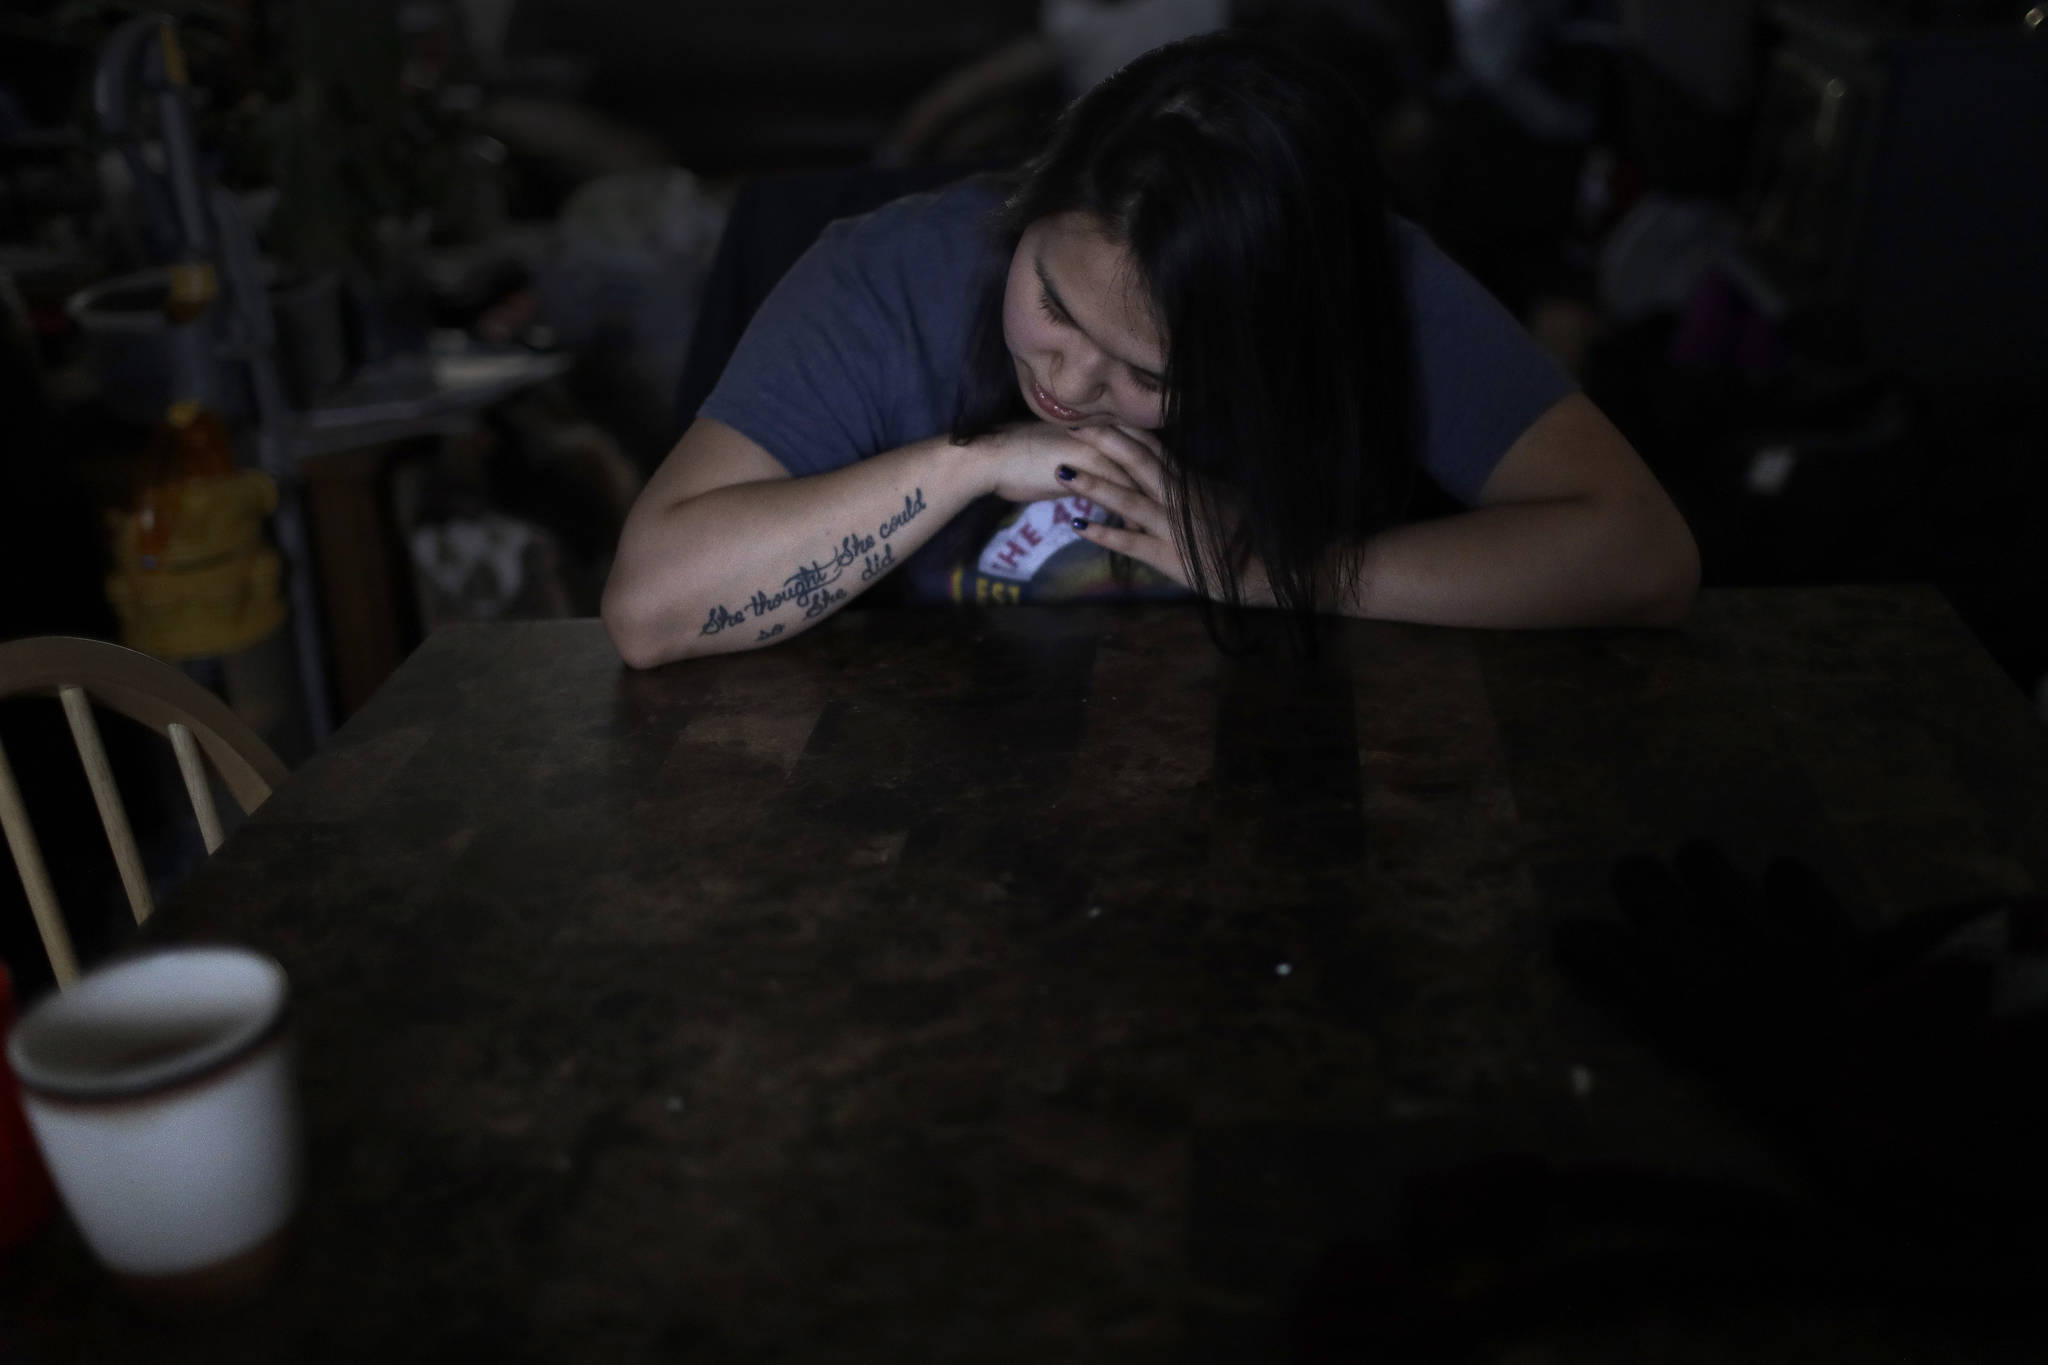 In this Feb. 16 photo, Deidre Levi rests her head for a moment in her grandmother’s house before a basketball game in the Native Village of St. Michael. Levi says she spoke up about being sexually assaulted because she wanted to be a role model for girls in Alaska. (AP Photo | Wong Maye-E)